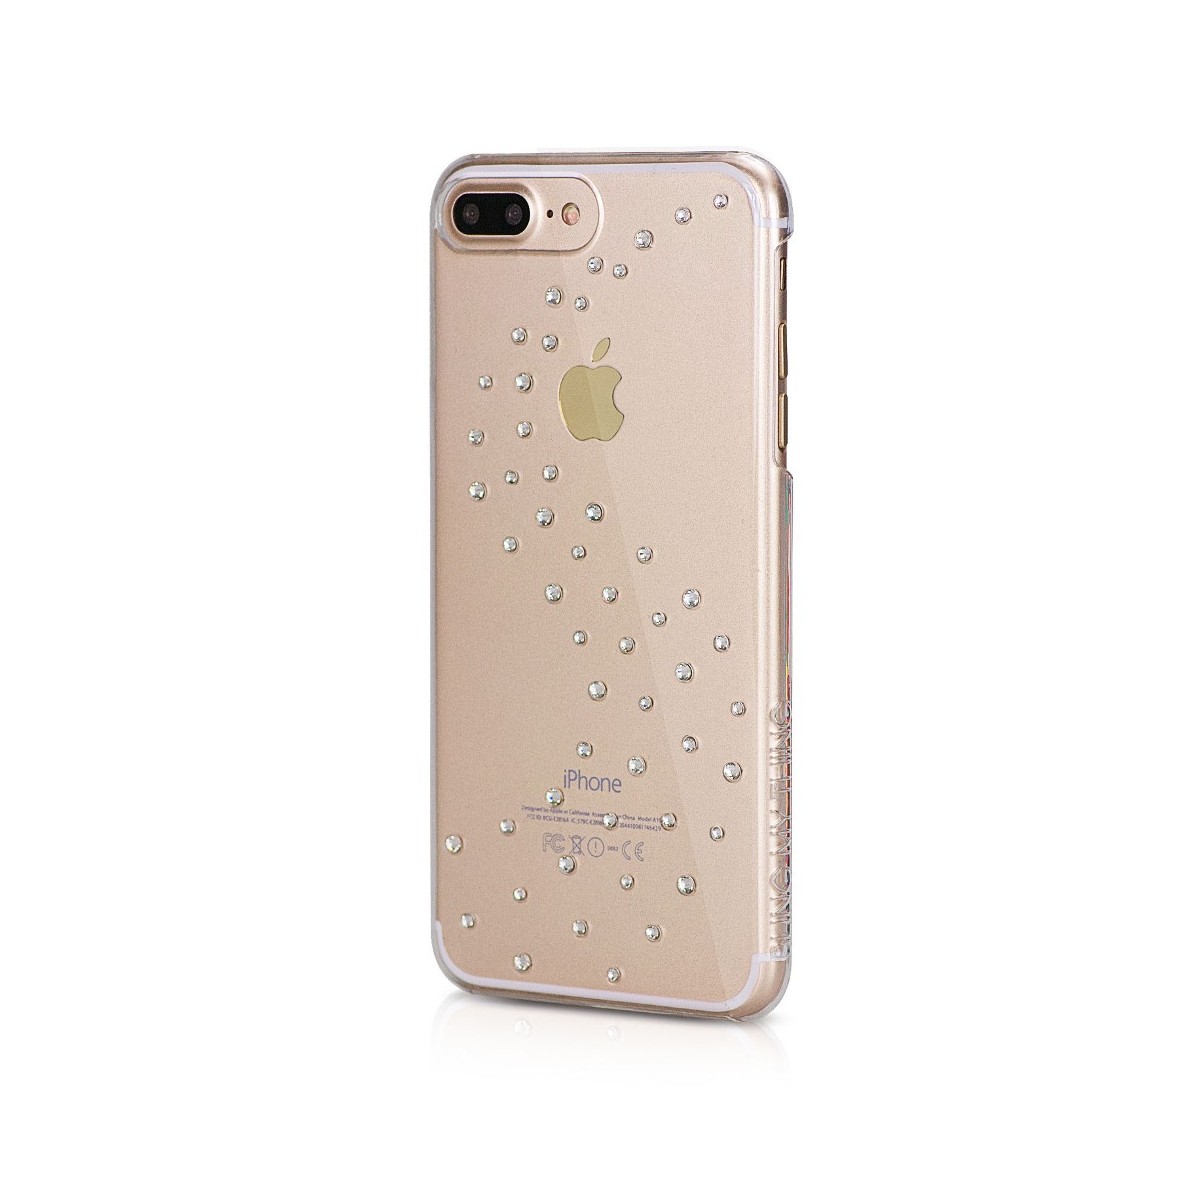 Coque iPhone 7 Plus Milky Way Pure Brillance Strass Cristal Swarovski - Bling My Thing